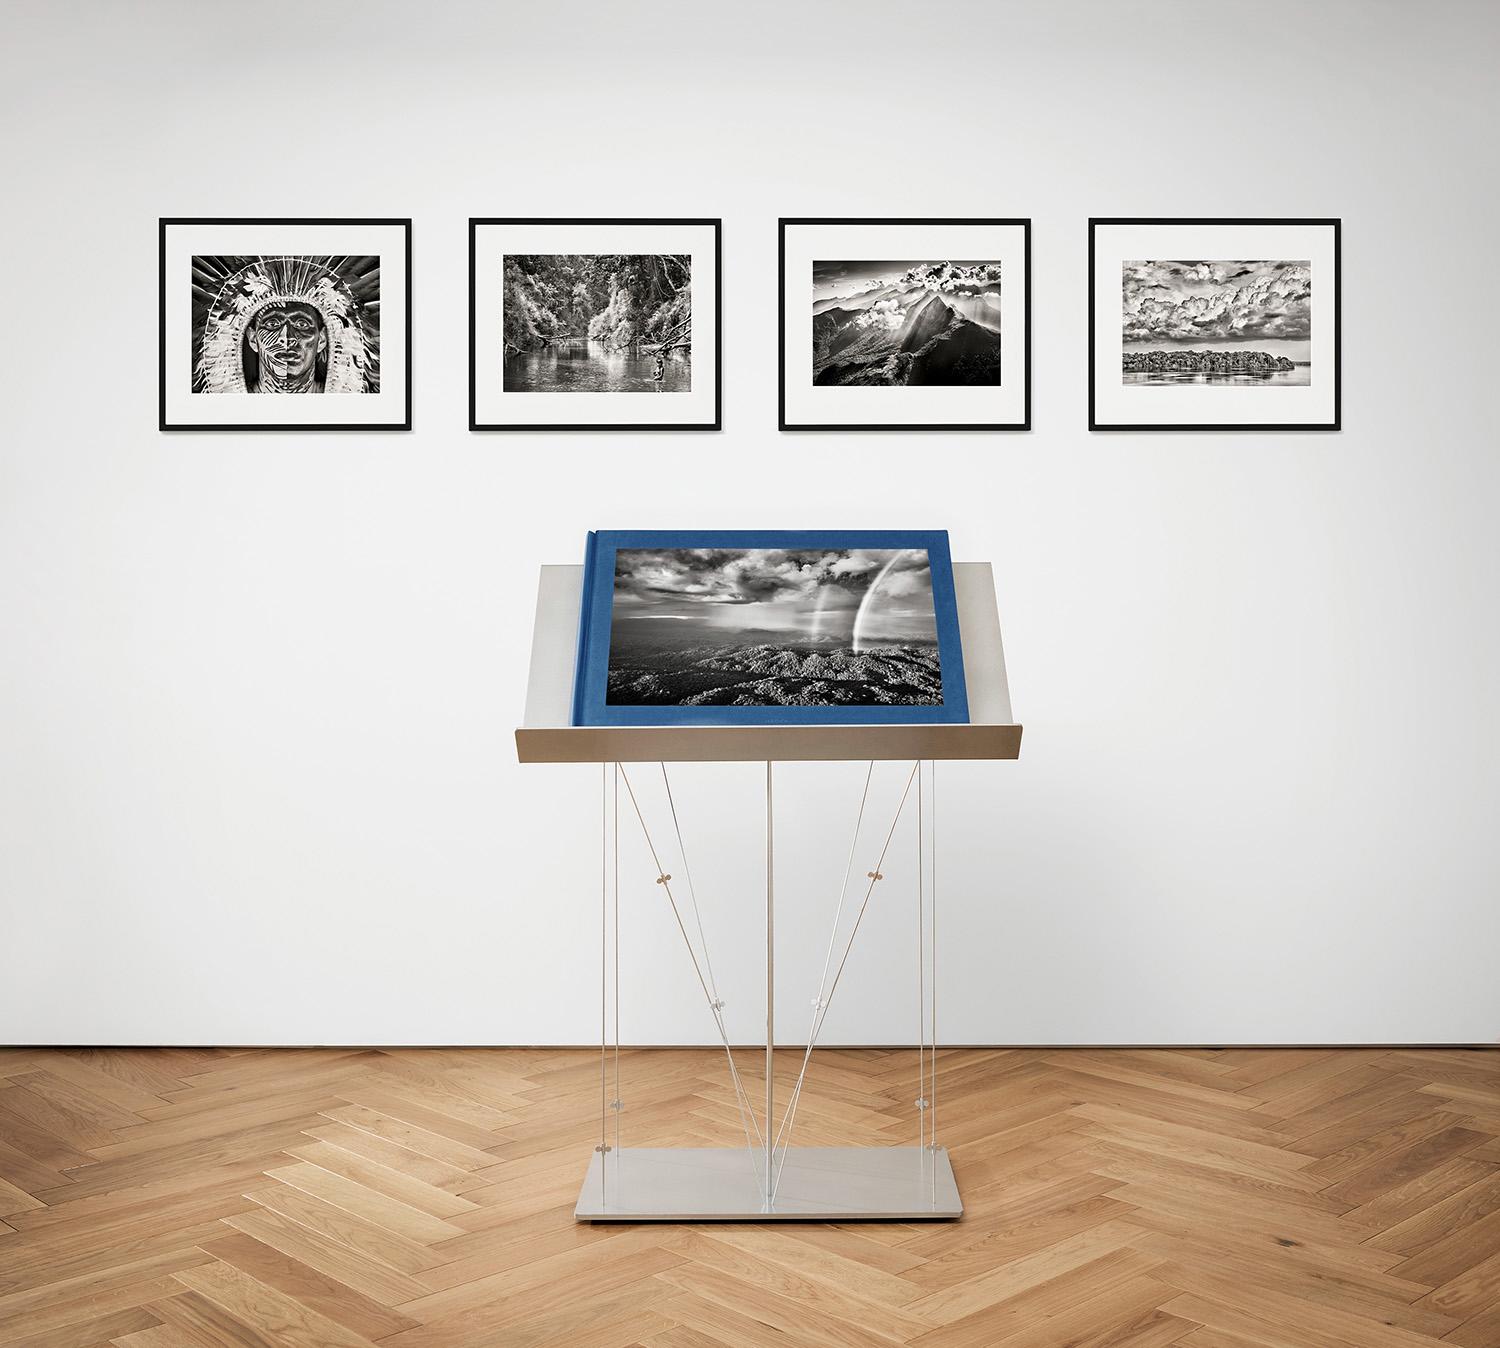 Collector’s Edition Book (No. 401–2,400), numbered and signed by Sebastião Salgado, with corresponding bookstand designed by Renzo Piano exclusively for the Amazônia project.
(Hardcover volume, 70 x 50.5 cm, 24.9 kg (54.9 lb), 472 pages, and